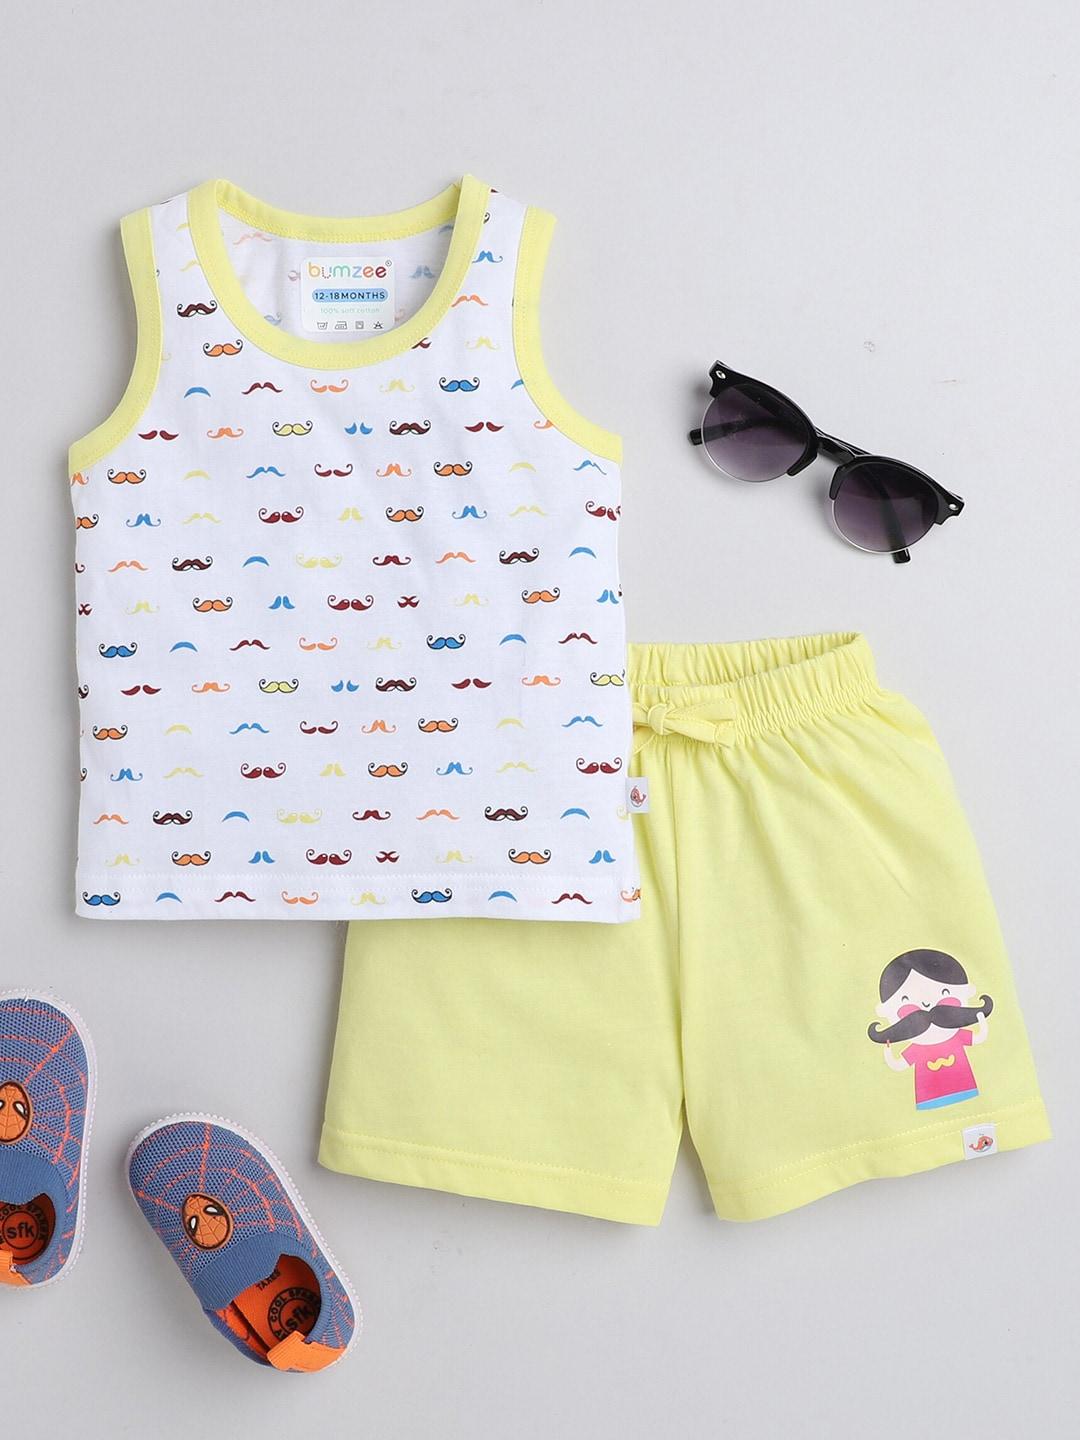 bumzee boys printed pure cotton t-shirt with shorts